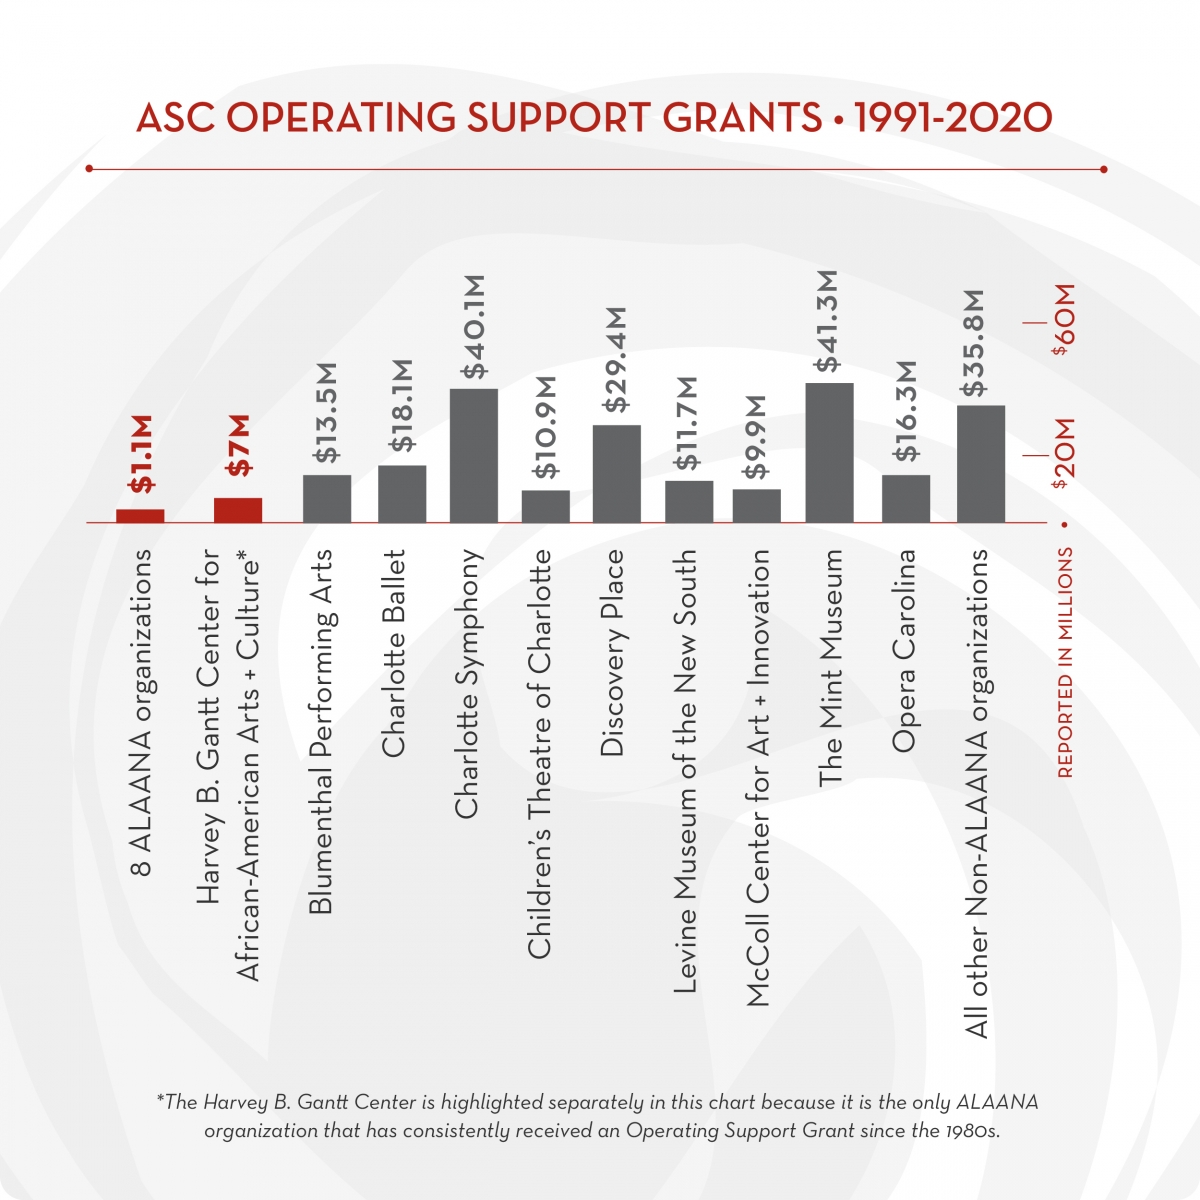 A chart titled “ASC Operating Support Grants, 1991-2020.” At left, a bar shows 8 ALAANA organizations received $1.1 million in grants, compared to organizations such as the Charlotte Symphony, which received $40.1 million.